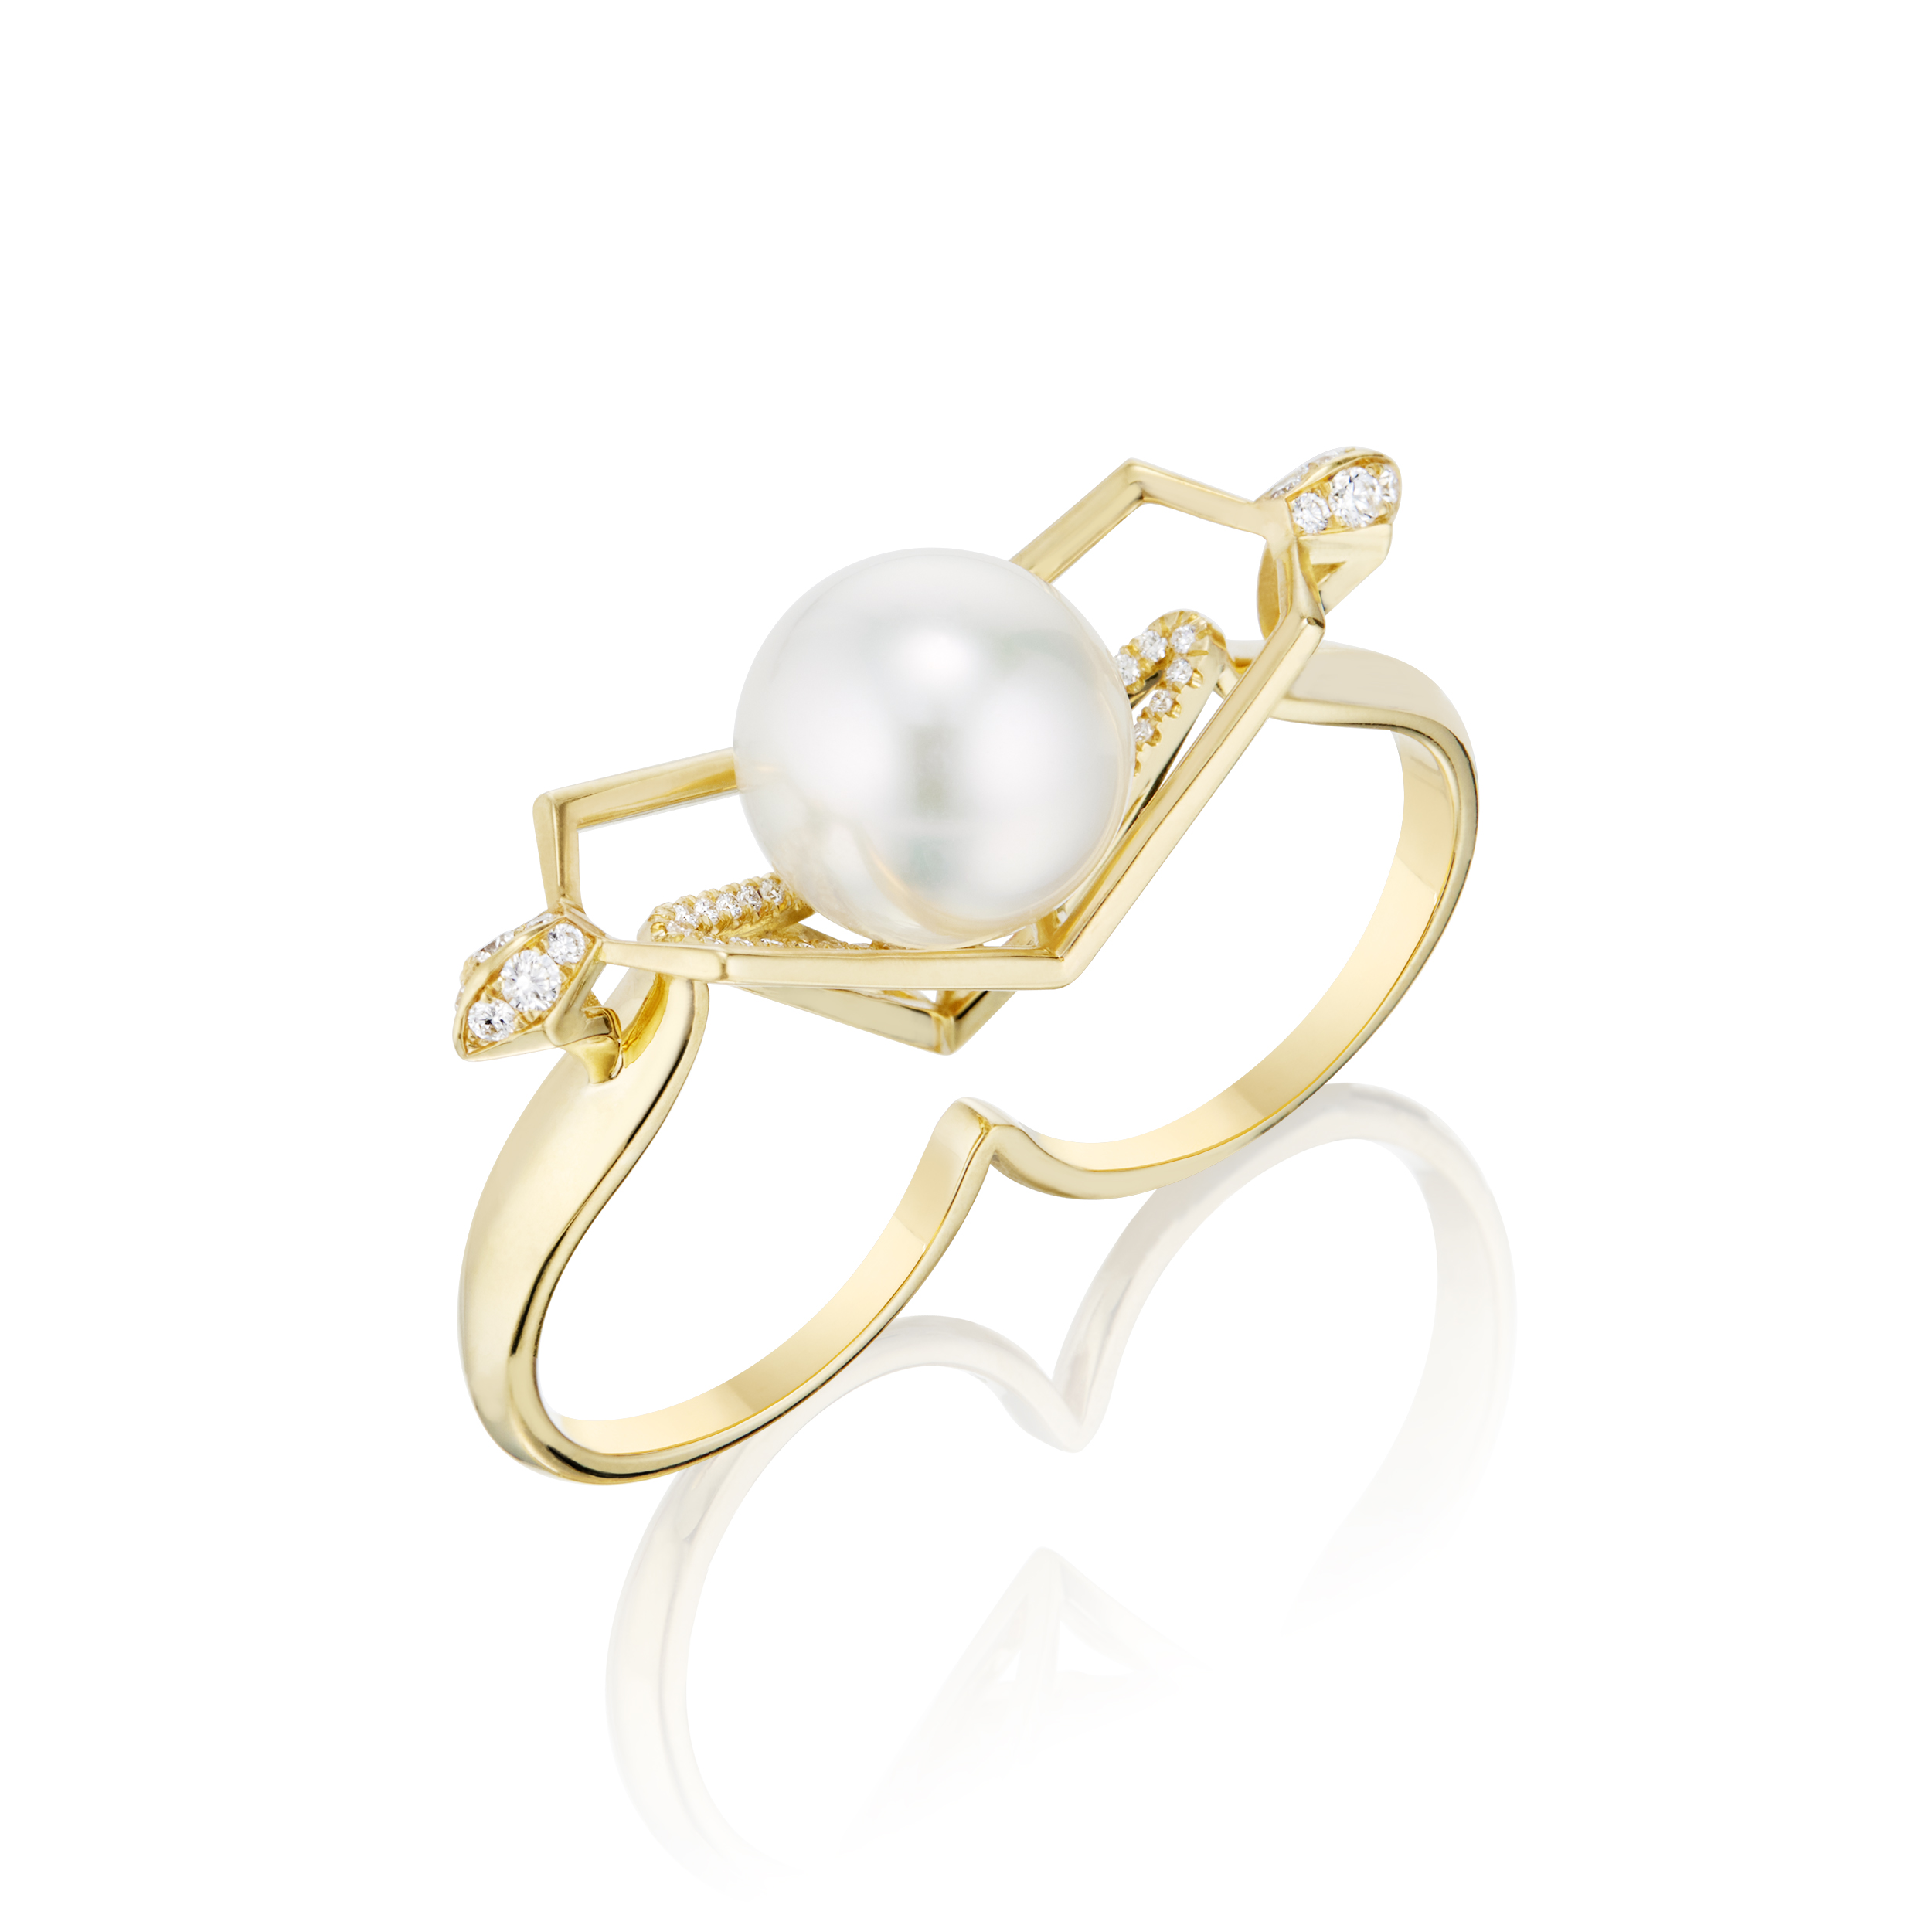 This is an overhead view of the Renisis Halo Lotus Double Ring. It's large pearl and dramatic and sharply angled triangular setting setting is is in full view. You can also see clearly the double ring designed for two adjacent fingers.